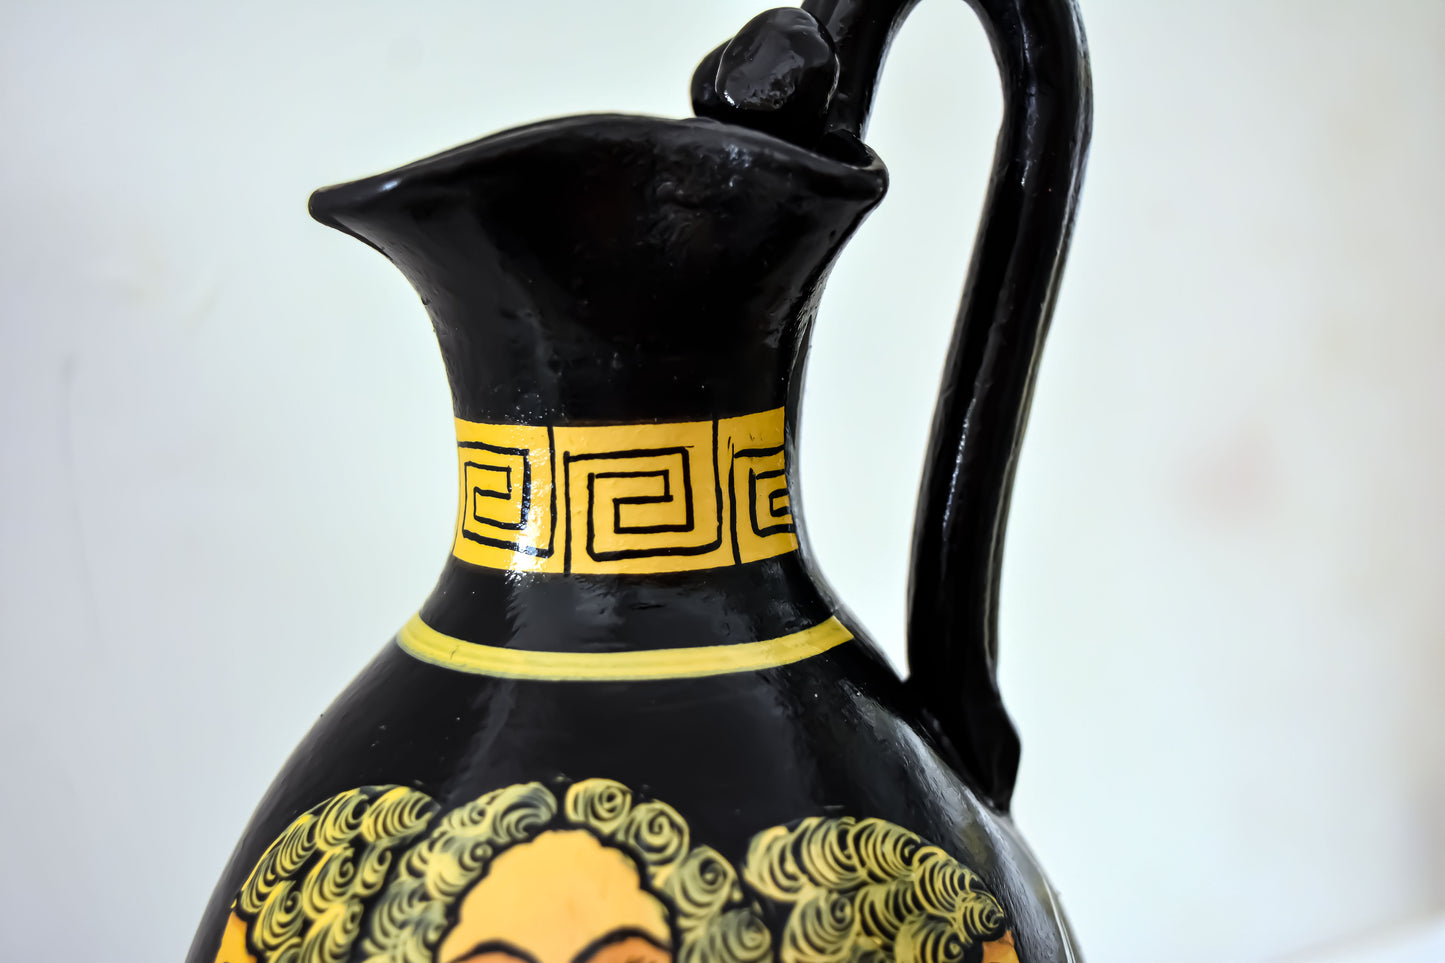 Goddess Hecate Hekate - Crossroads, Night, Magic, Witchcraft, Herbs and poisonous Plants, Ghosts, Necromancy, Sorcery - Ceramic Vase